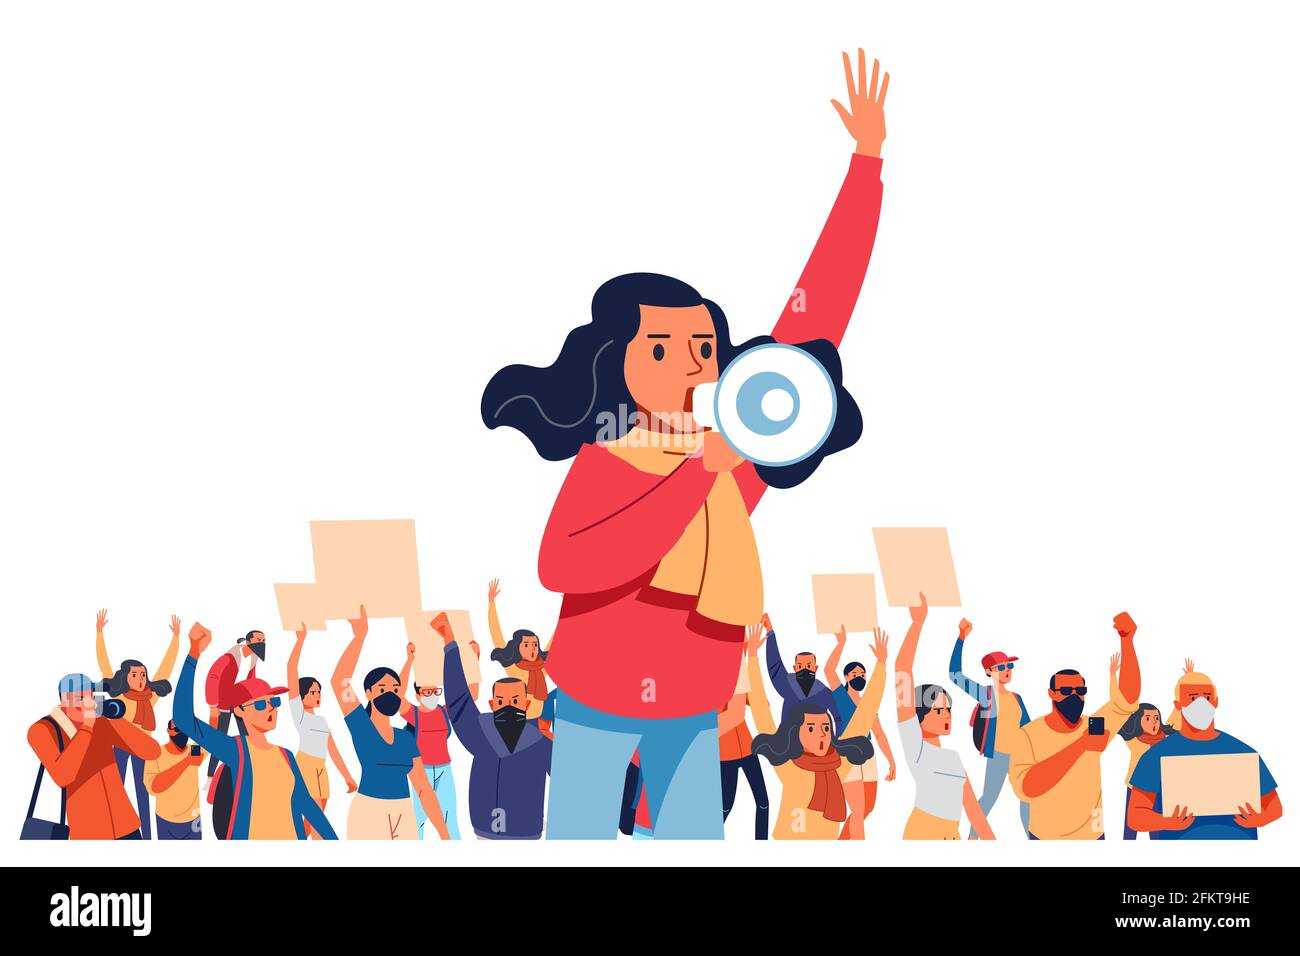 A young woman shouts through megaphones, supporting the protests against the background of discontented people protesting. Flat design colorful Stock Vector